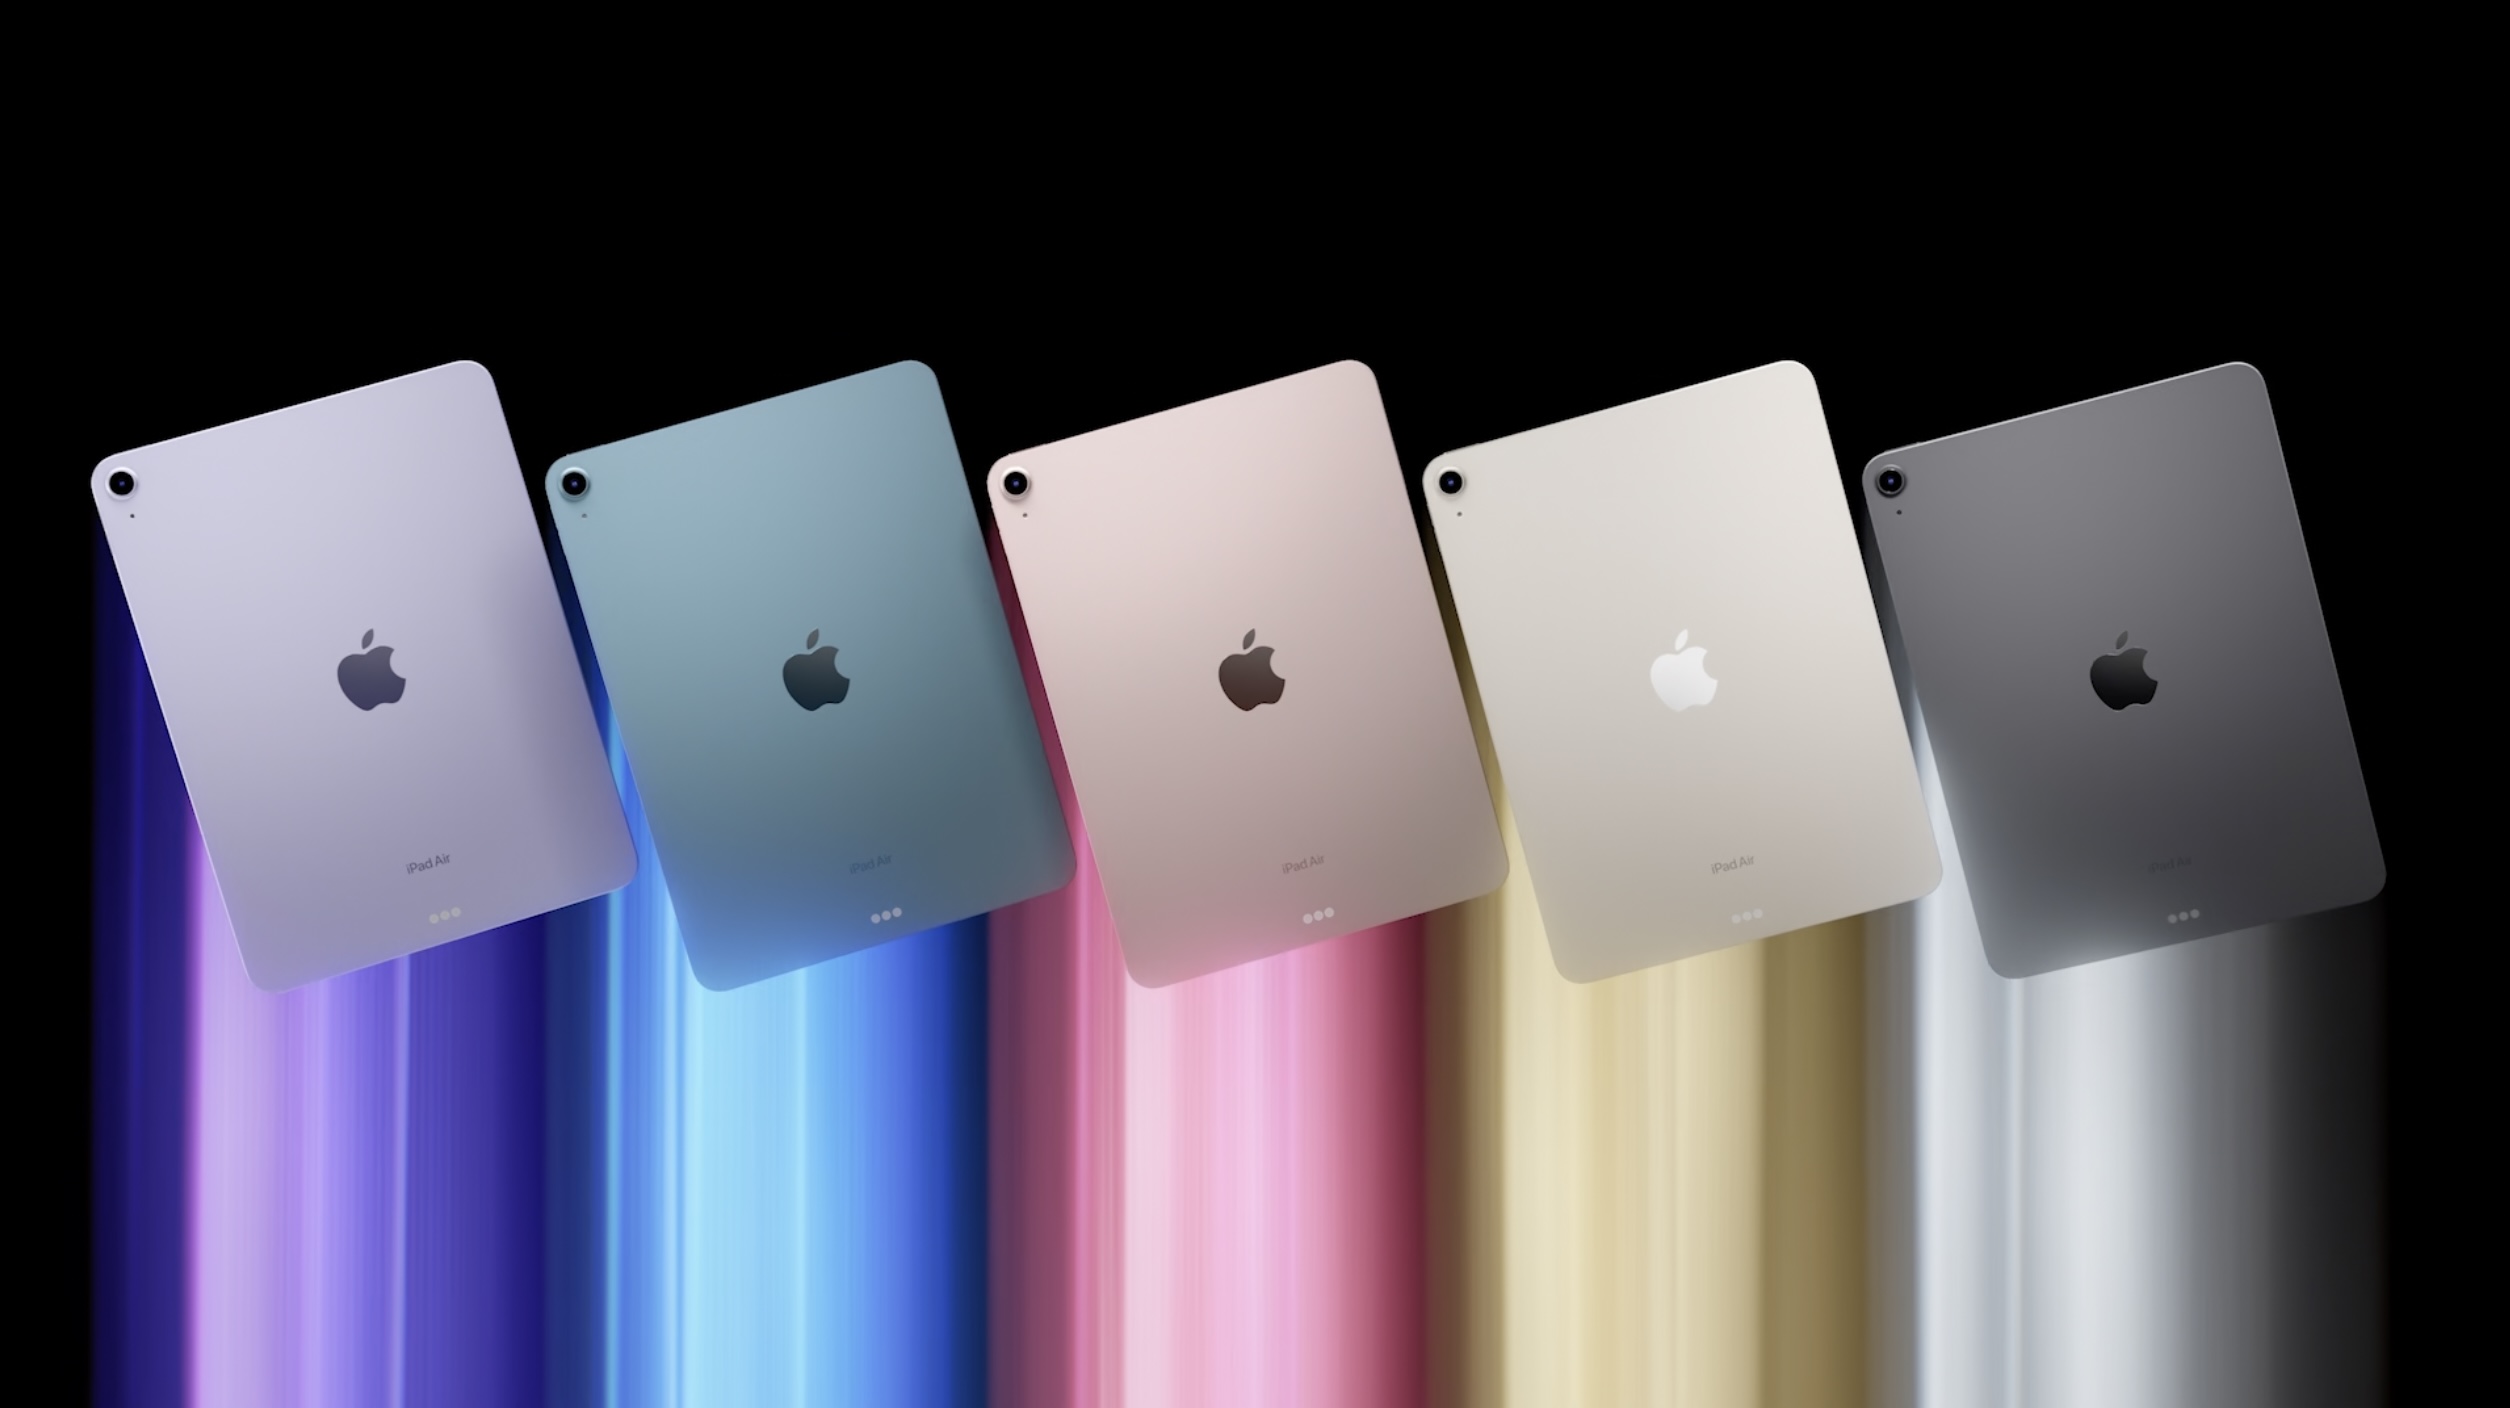 IPad Air: History, specs, pricing, review, deals, and rumors - 9to5Mac